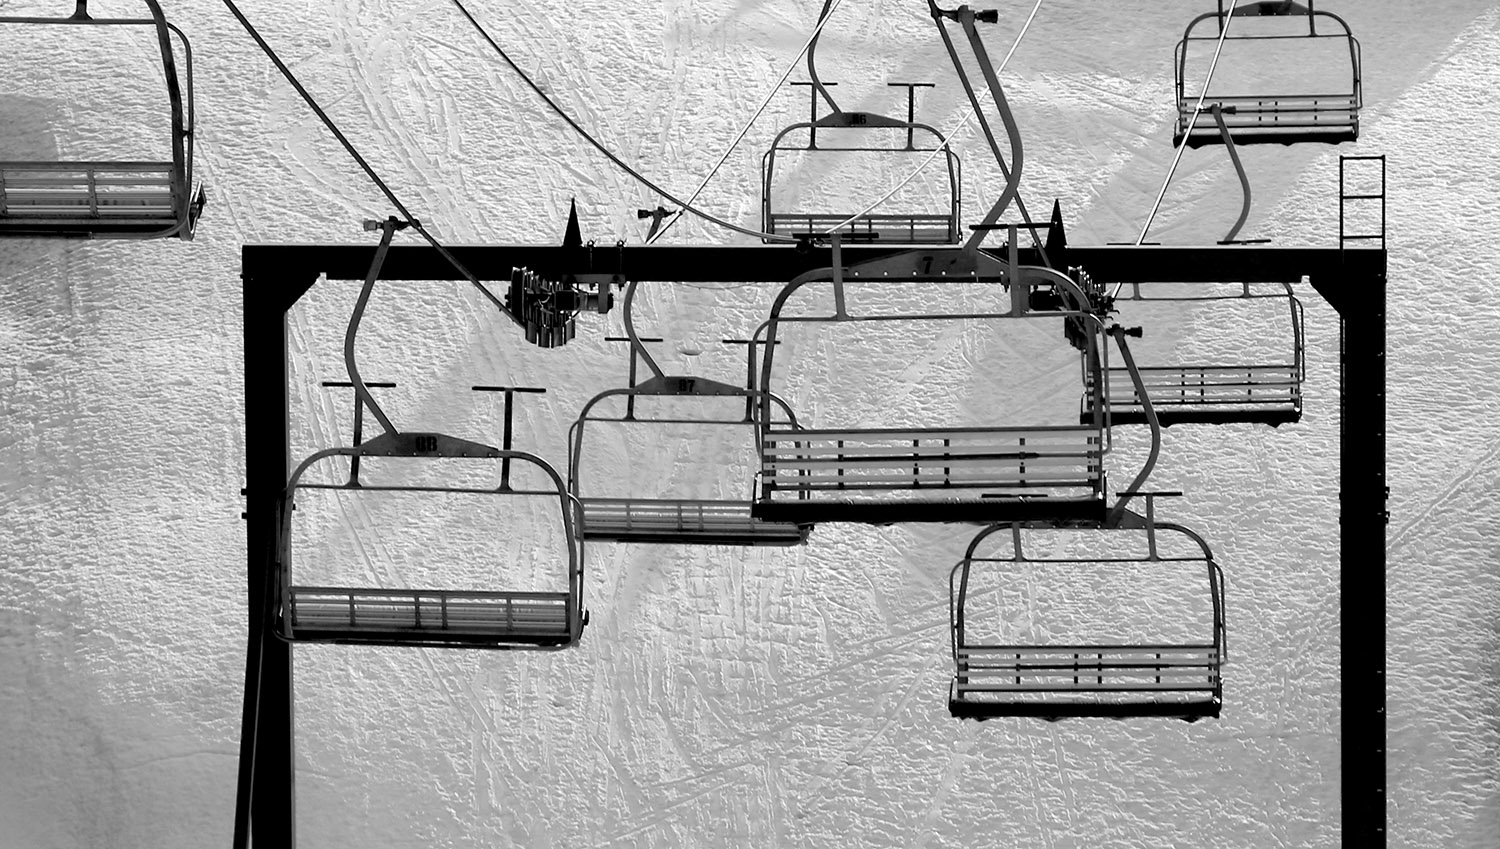 A view of a tower and some of the chairs on the Timberline Quad Chairlift during a spring ski tour at Bolton Valley Resort in Vermont